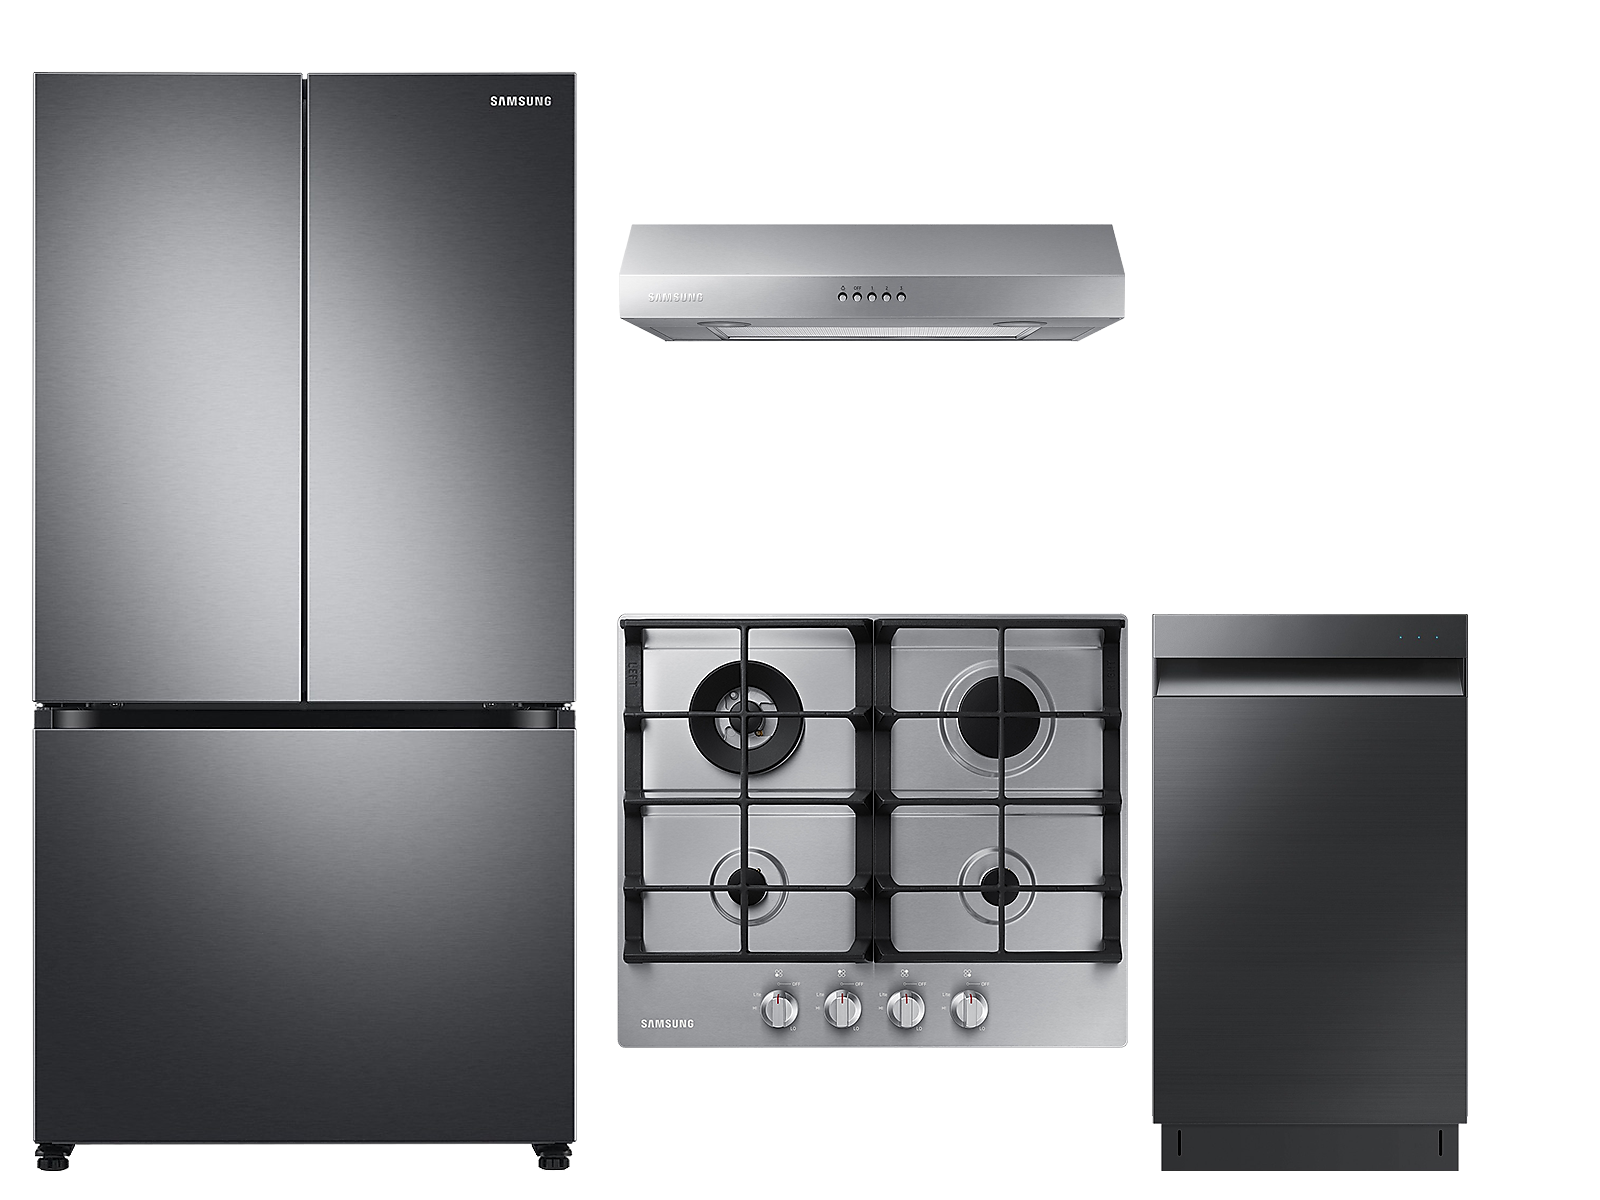 Samsung 3-Door French Door Refrigerator, gas cooktop, range hood and dishwaster small kitchen package(BNDL-1646291346790) photo